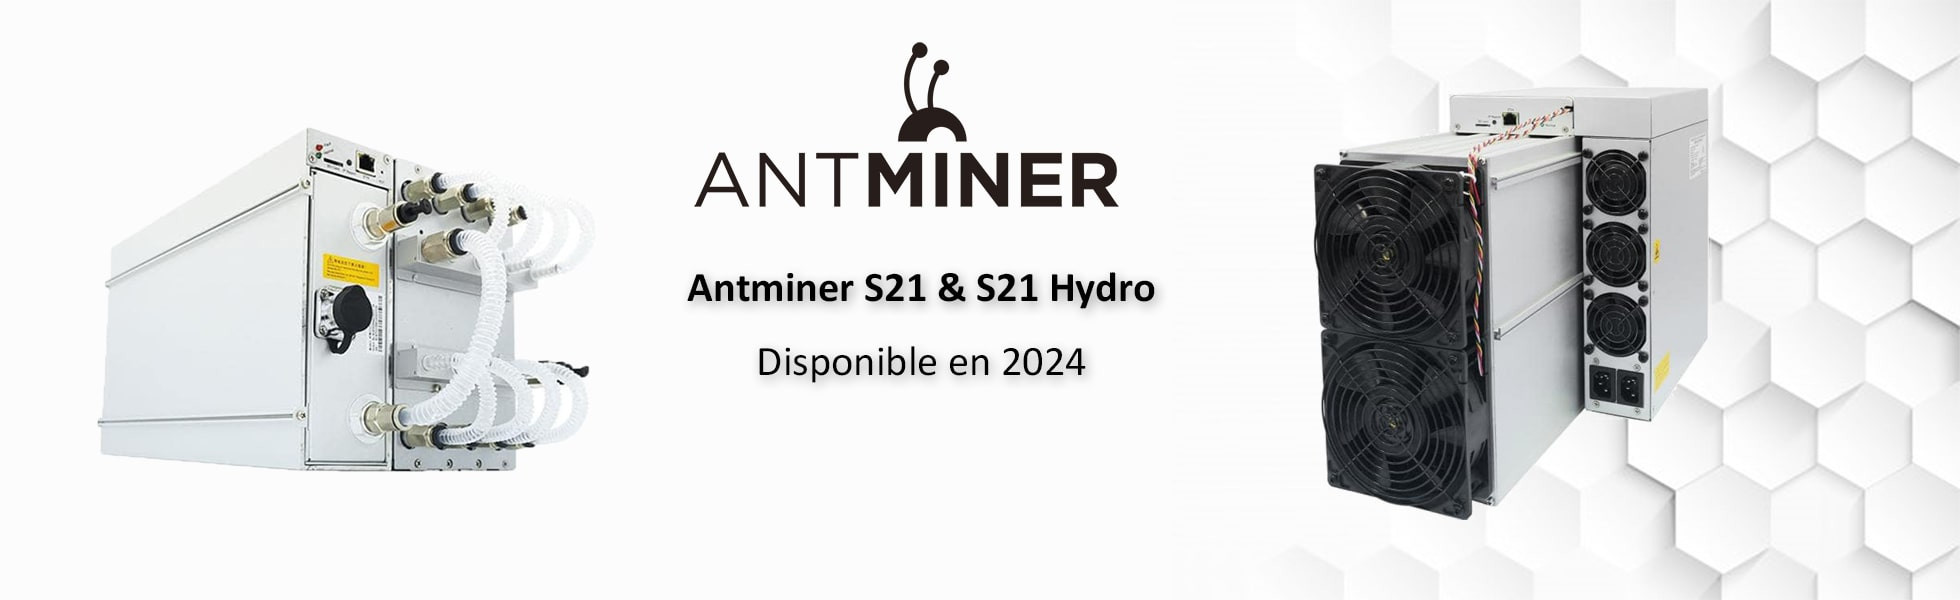 The bitcoin asic Antminer S21 & S21 Hydro